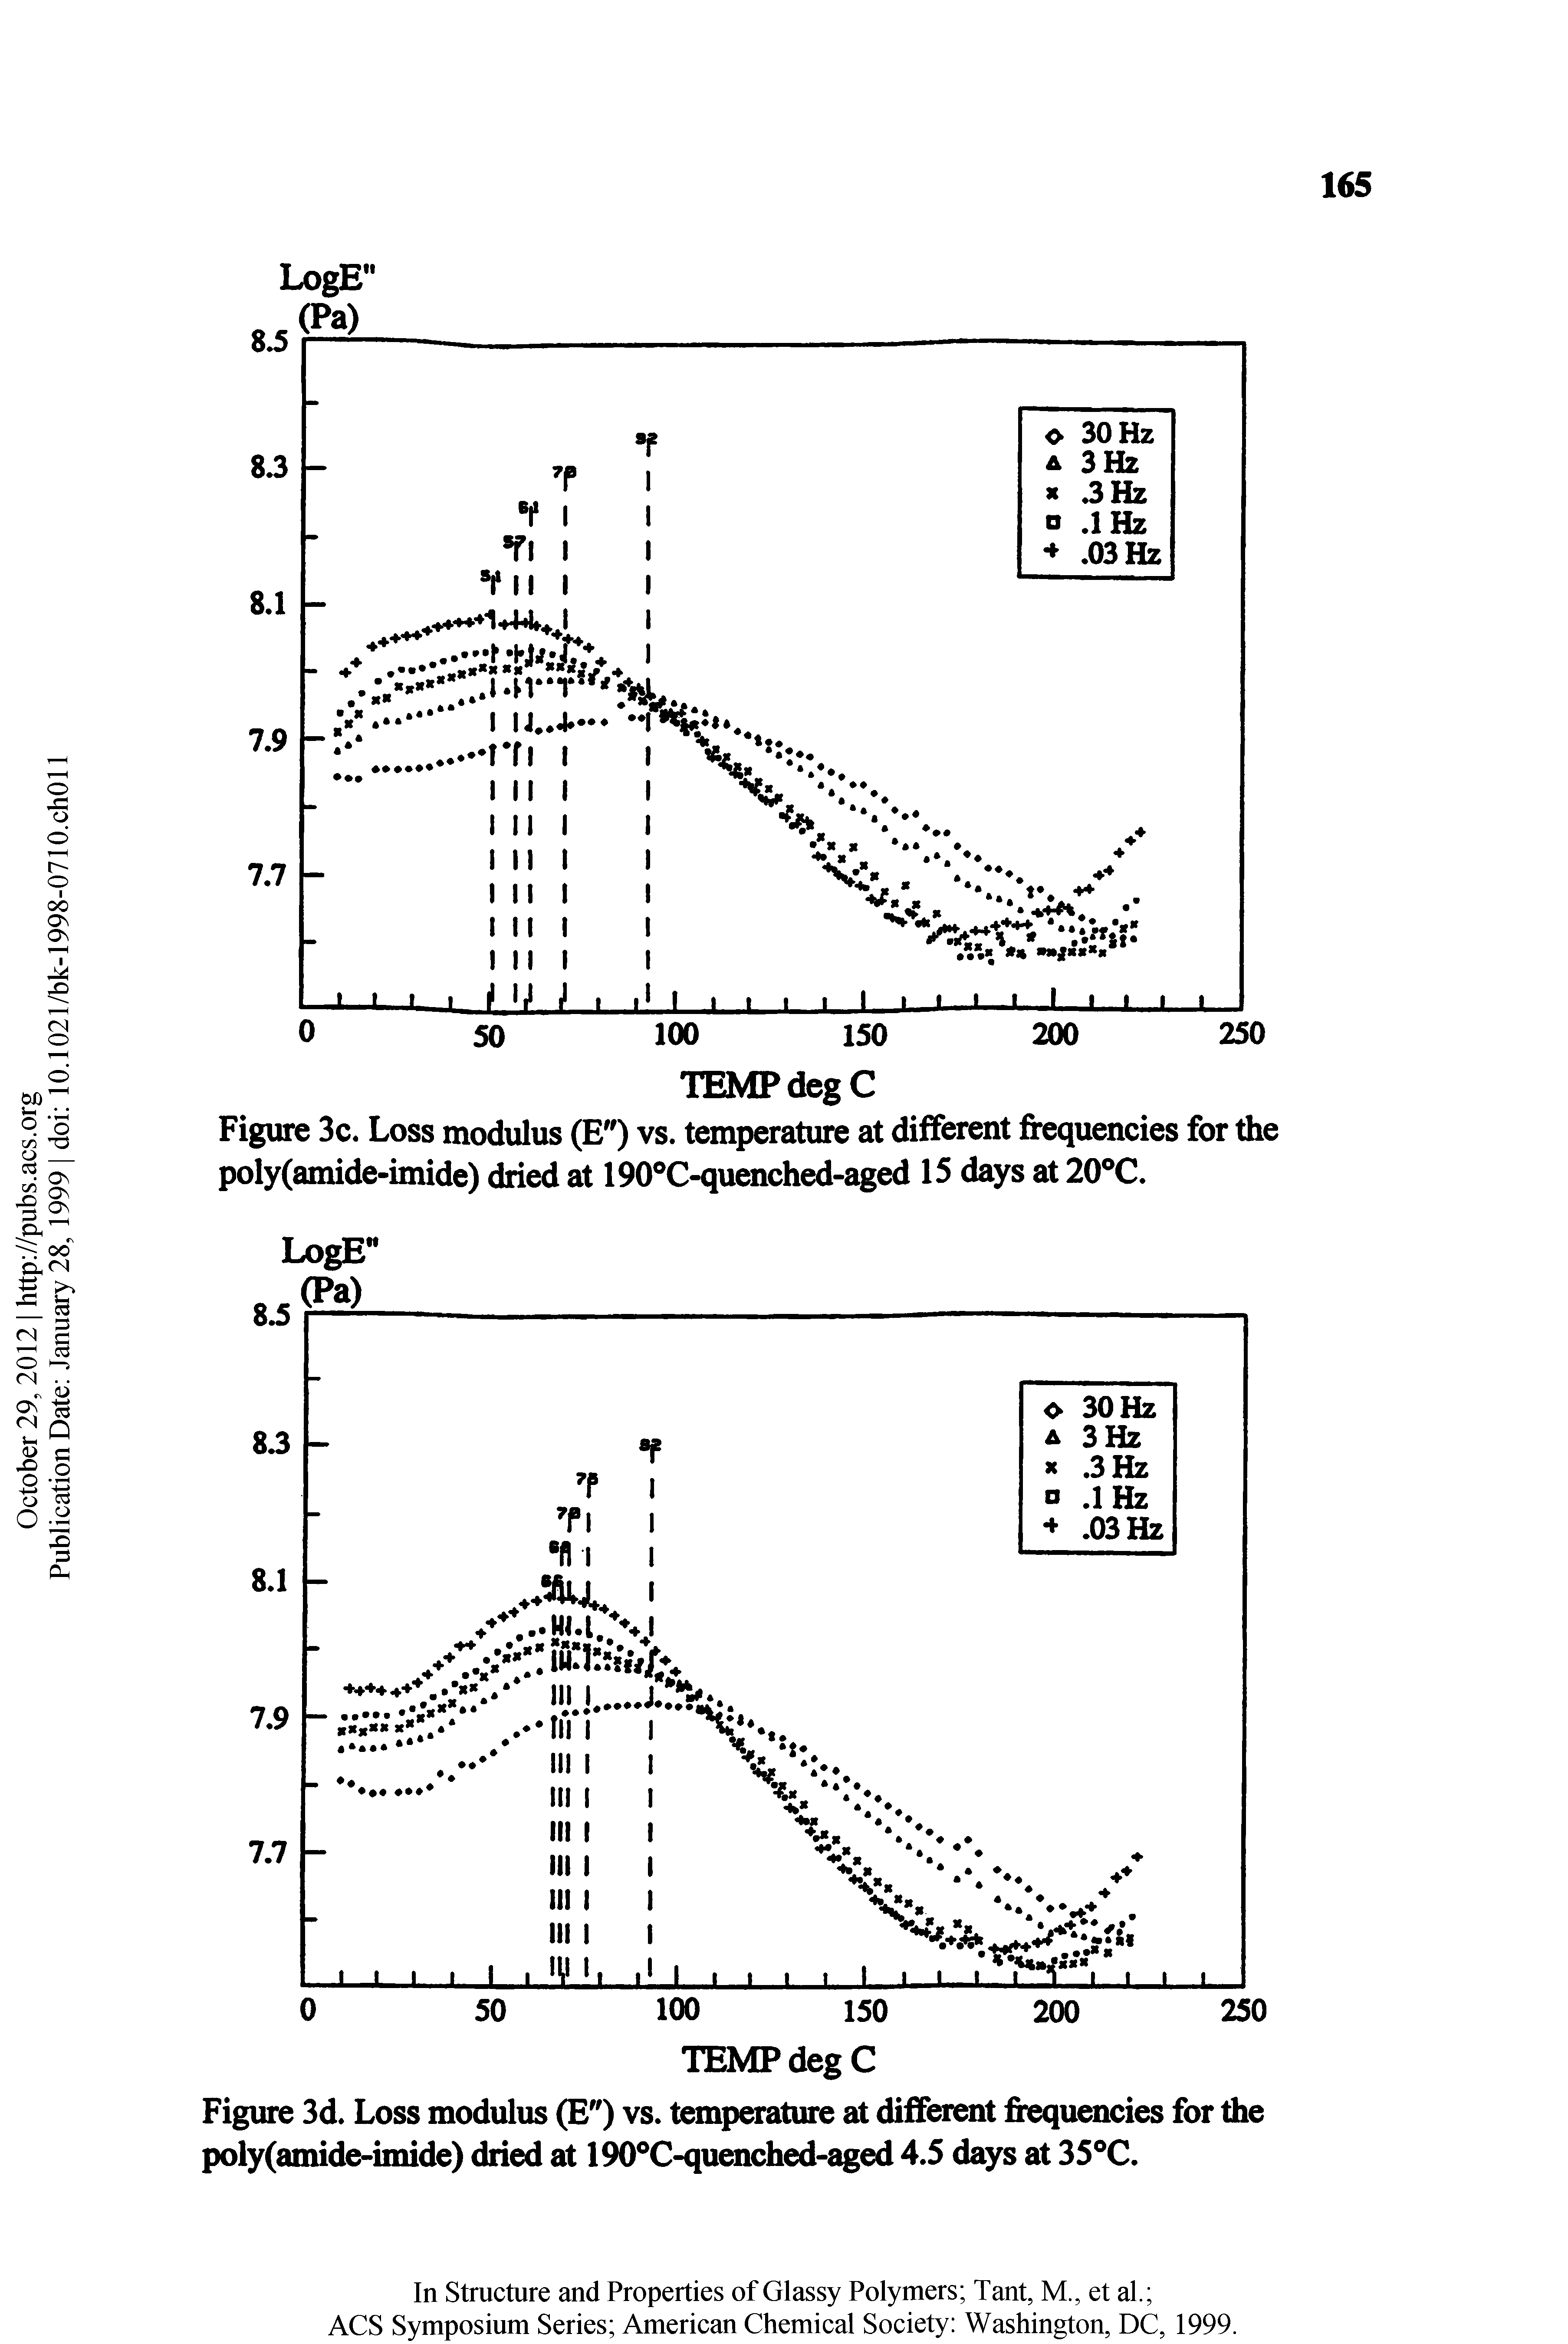 Figure 3c. Loss modulus (E") vs. temperature at different frequencies for the poly(amide-imide) dried at 190 C-quenched-aged 15 days at 20 C.